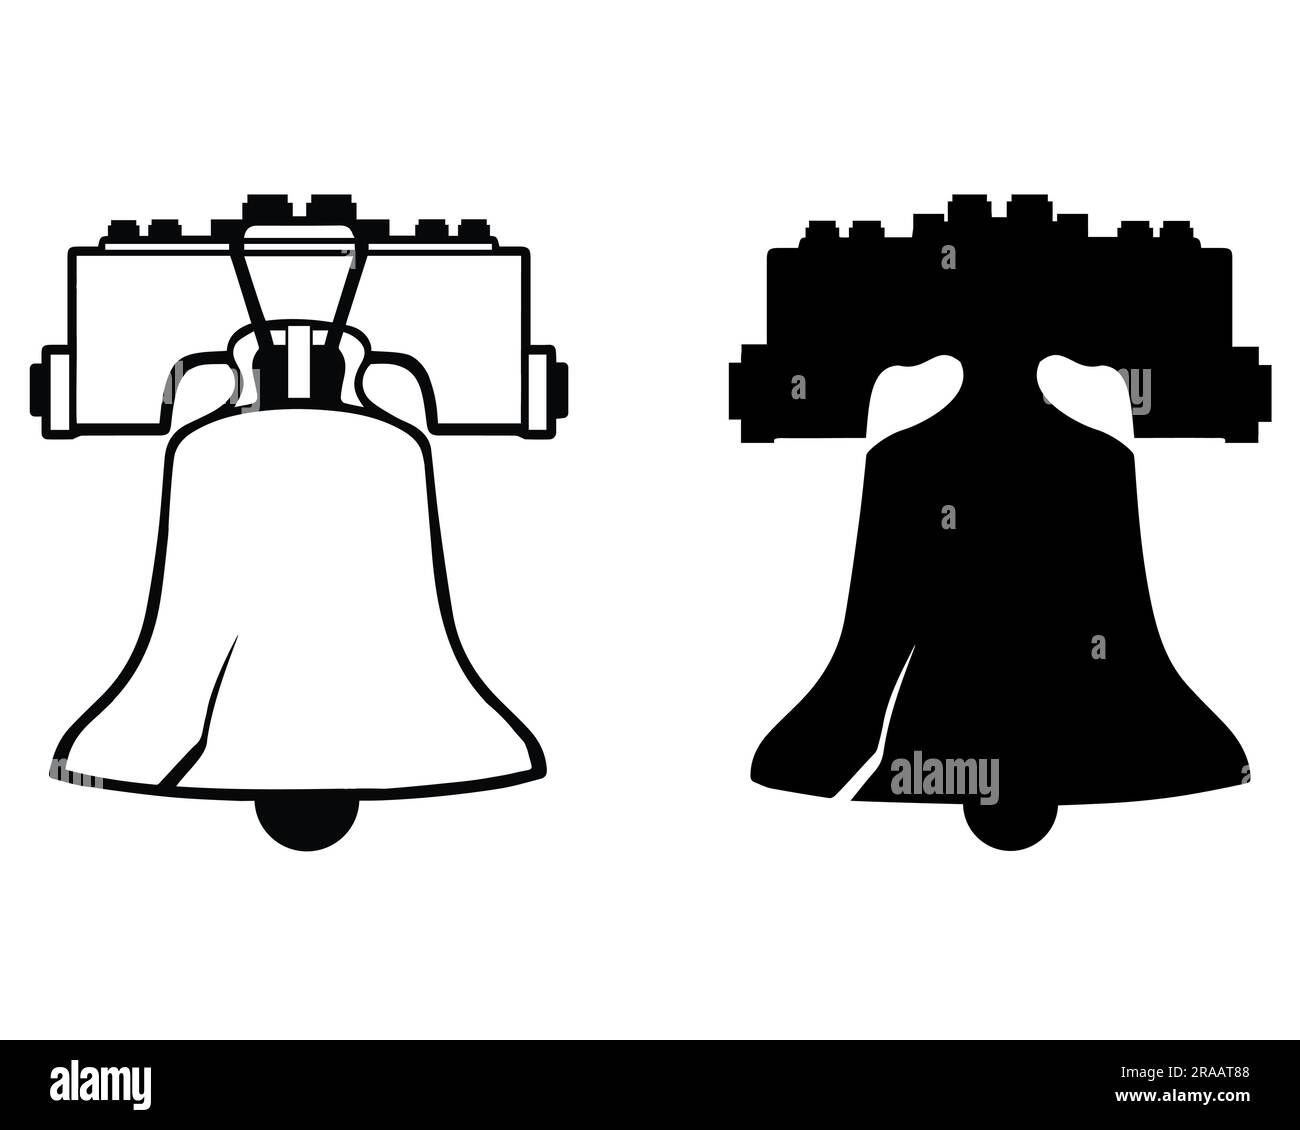 Set of Liberty Bell Silhouette Stock Vector